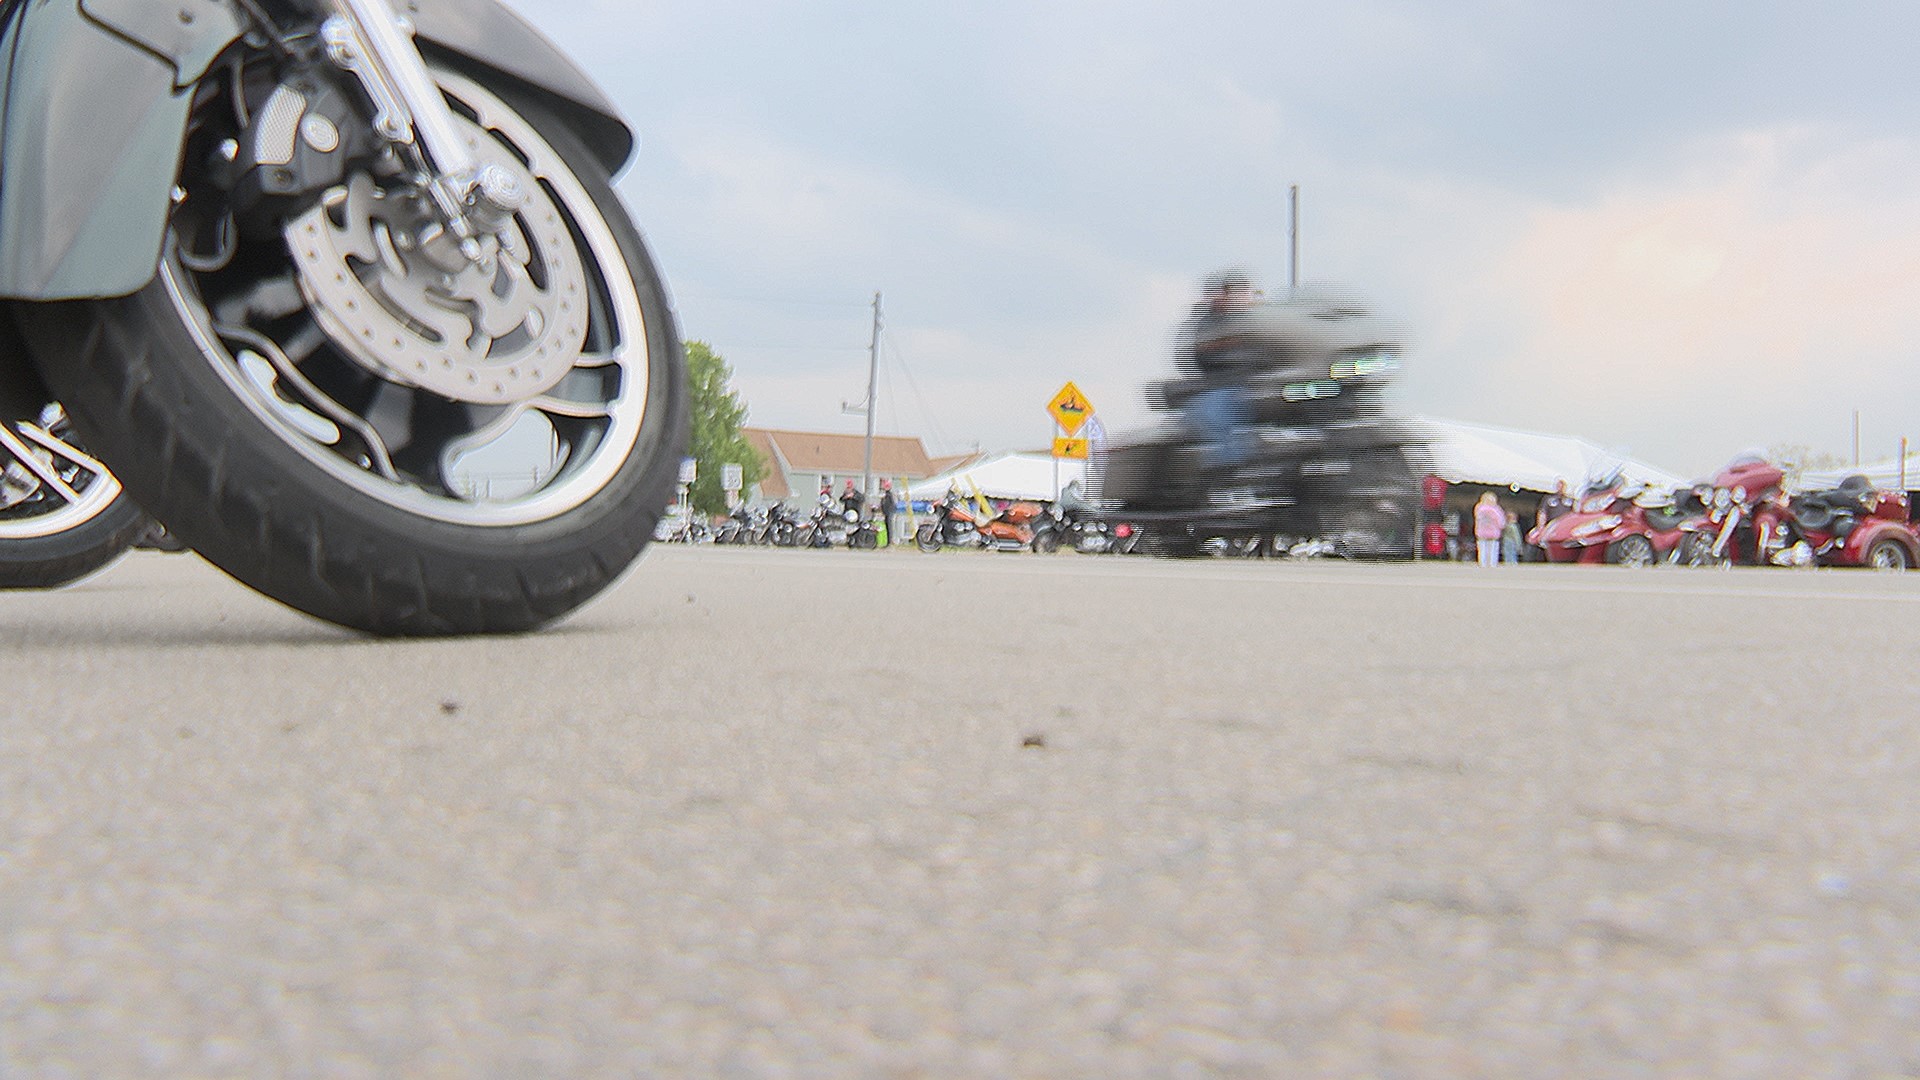 The Blessing of the Bikes is happening this weekend in Baldwin, and thousands are expected to get their motorcycles blessed for this riding season.